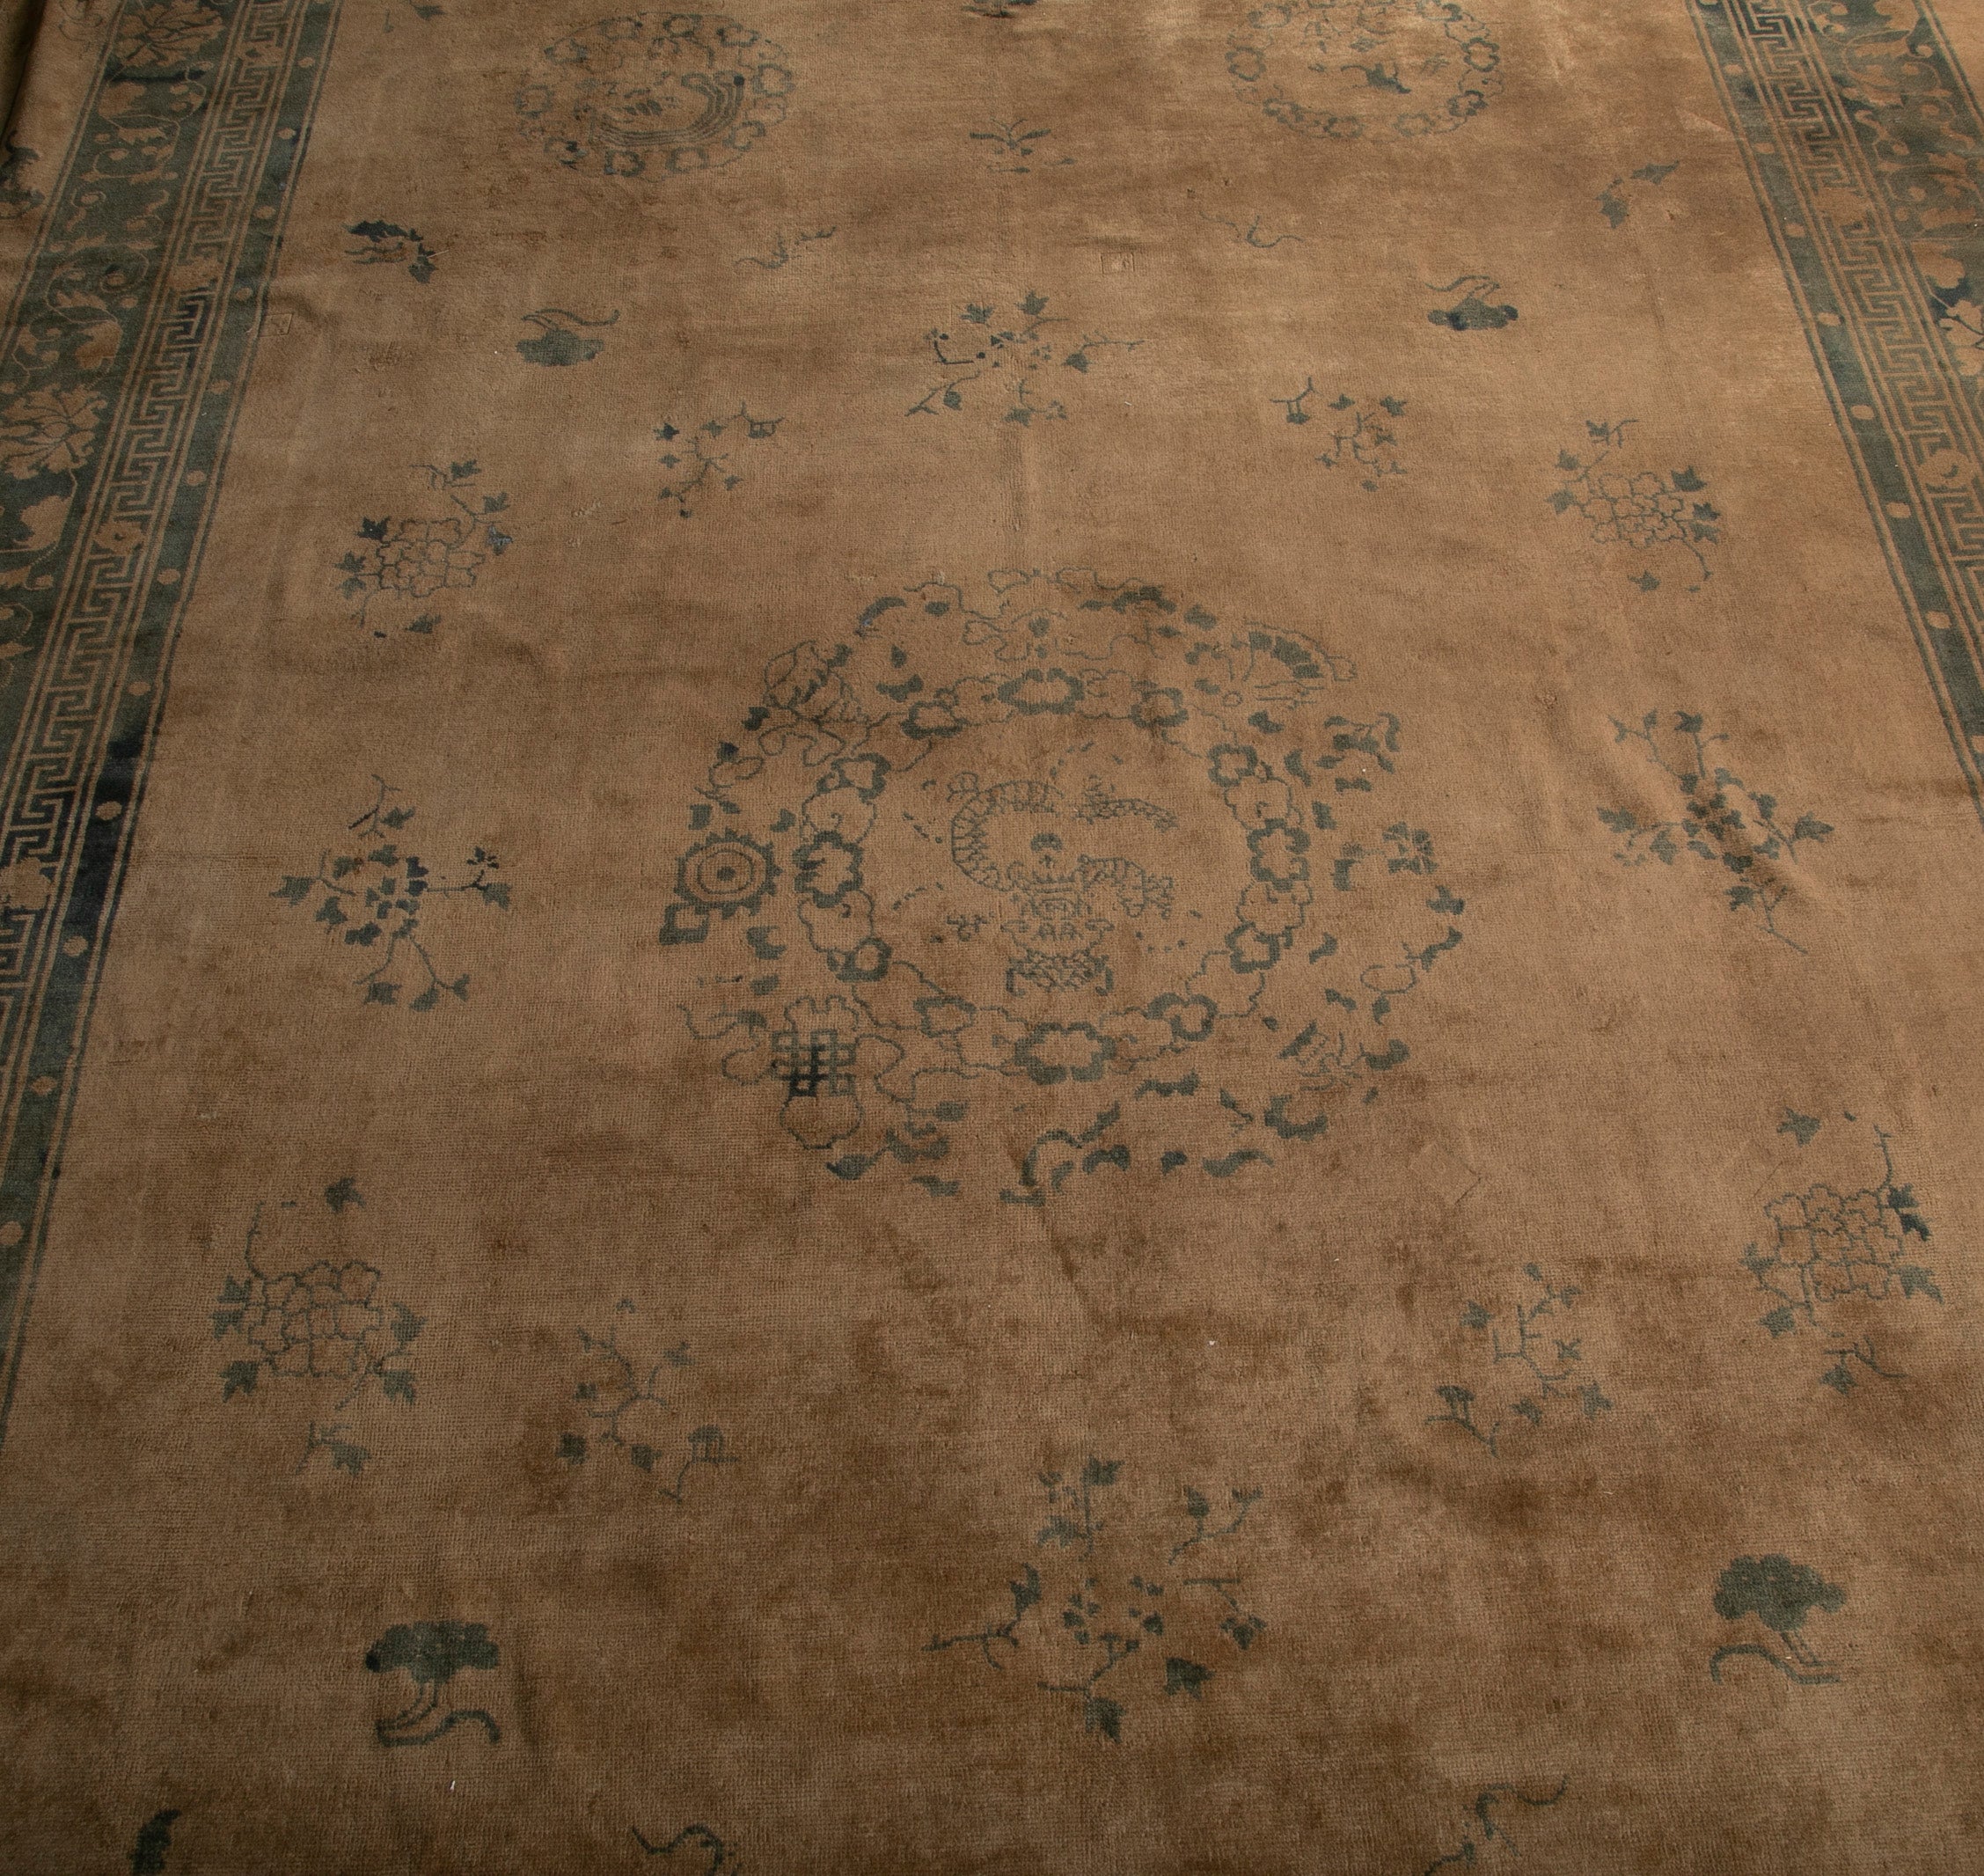 Chinese Carpet with Floral and Eyed Border Around Field of 5 Medallions